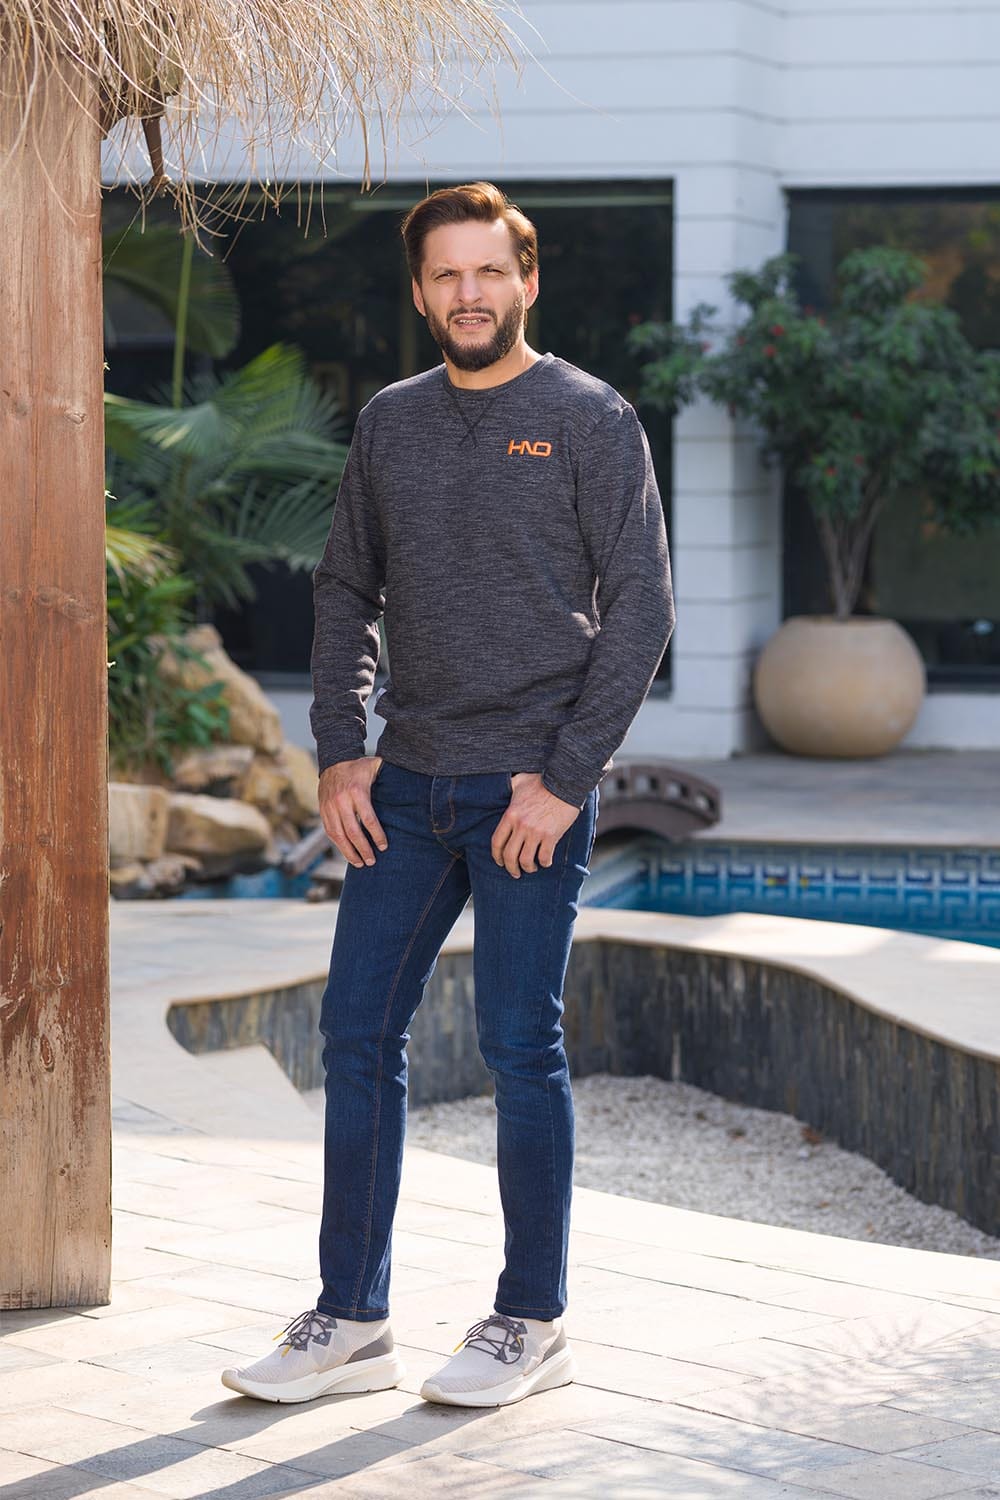 Hope Not Out by Shahid Afridi Men Sweat Shirt ORANGE EMBROIDERED HNO